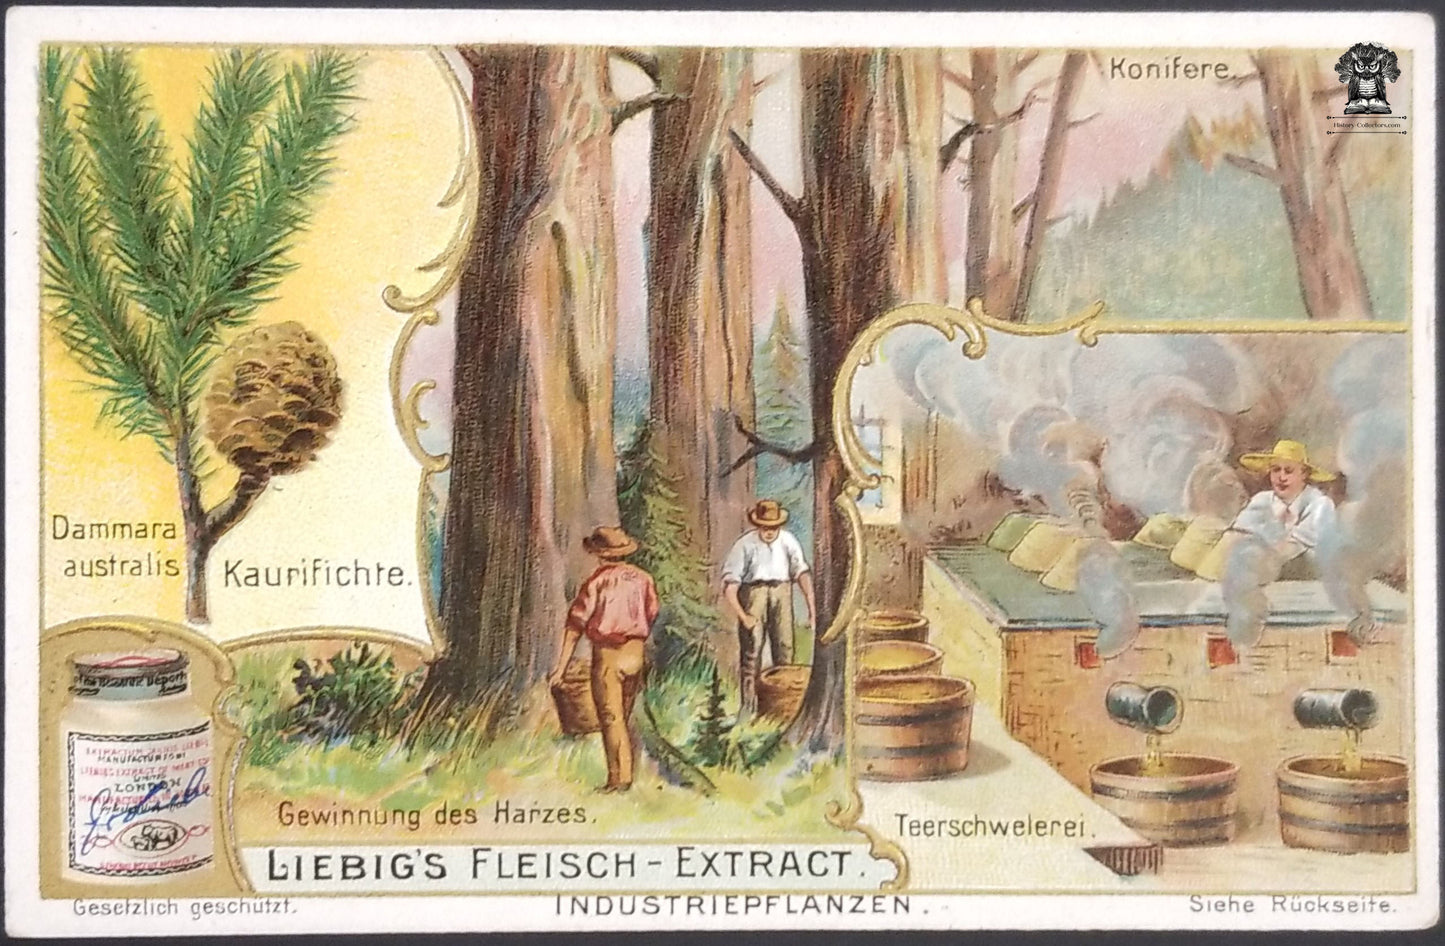 1880's German Liebig's Extract Advertising Trade Card - Spruce Resin Extraction